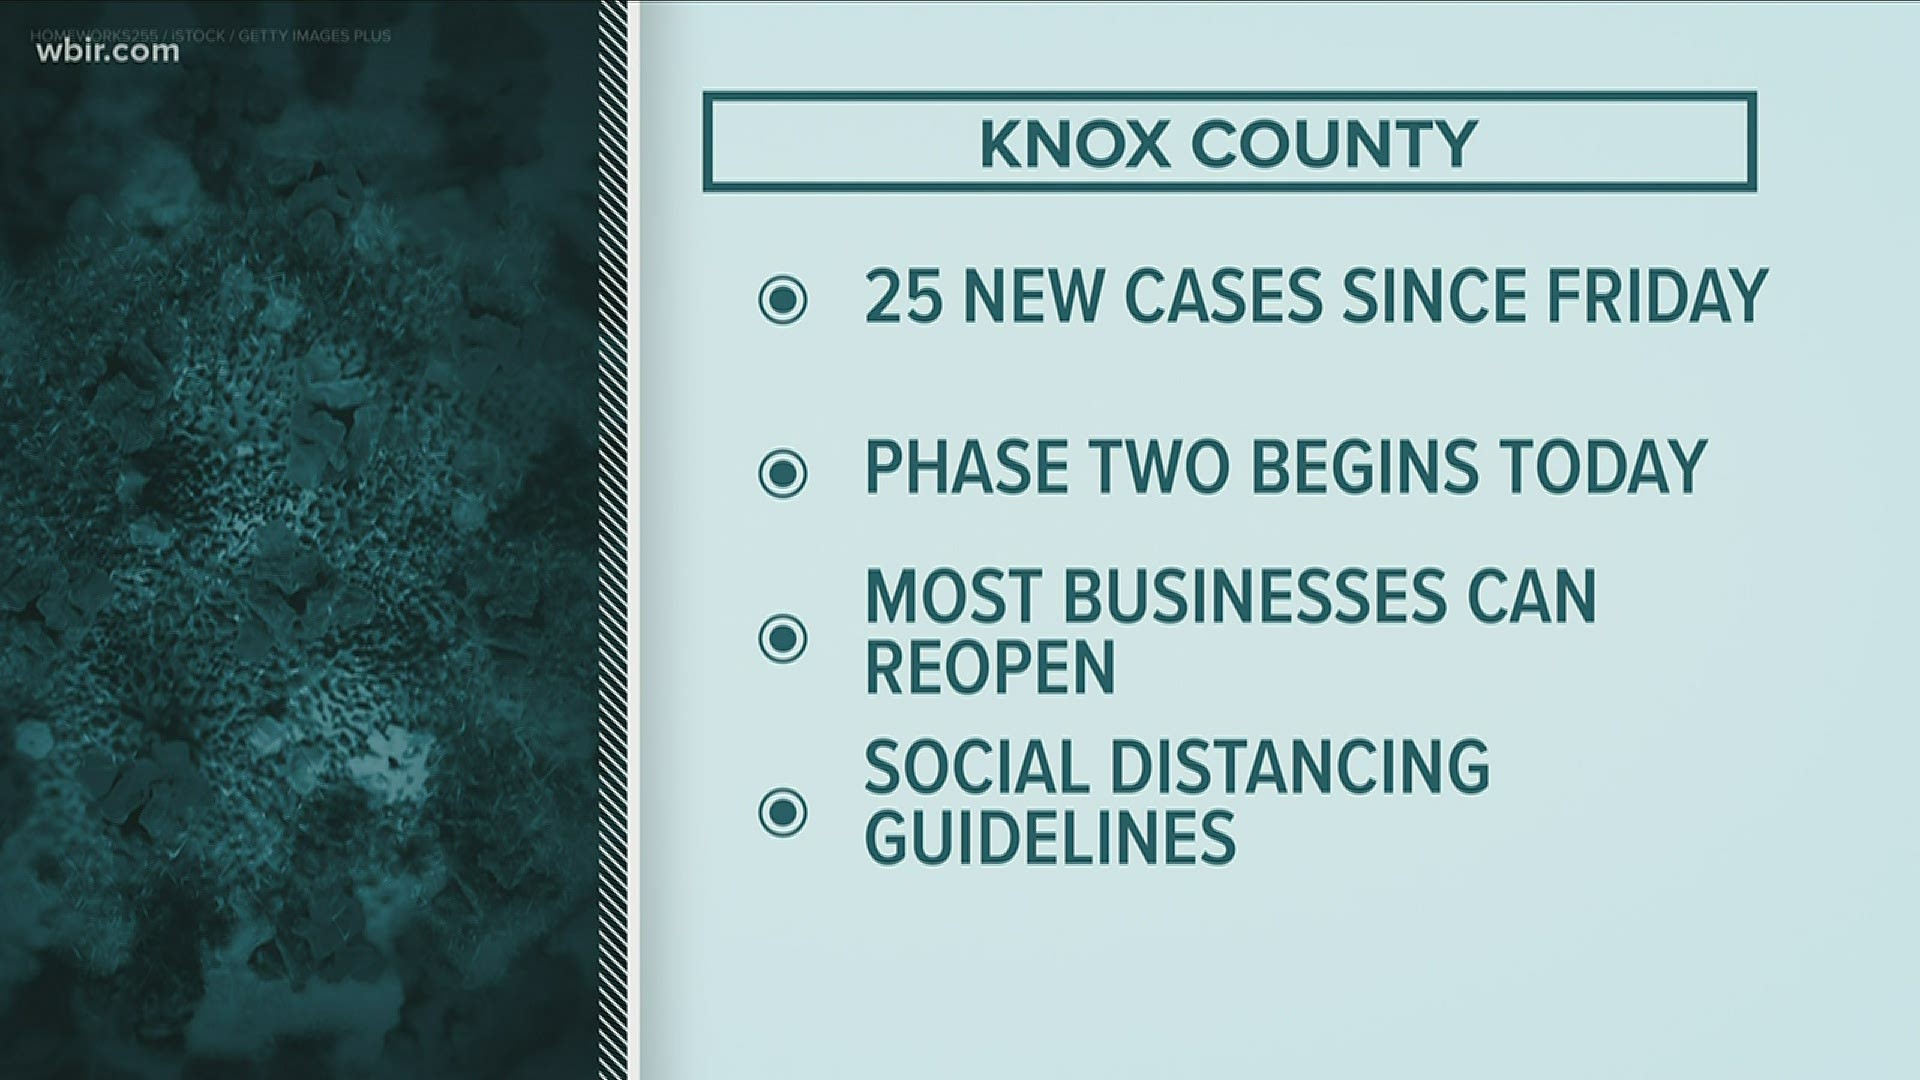 Knox County health officials said they've seen a 25-case bump since Friday of COVID-19 as more businesses reopen.